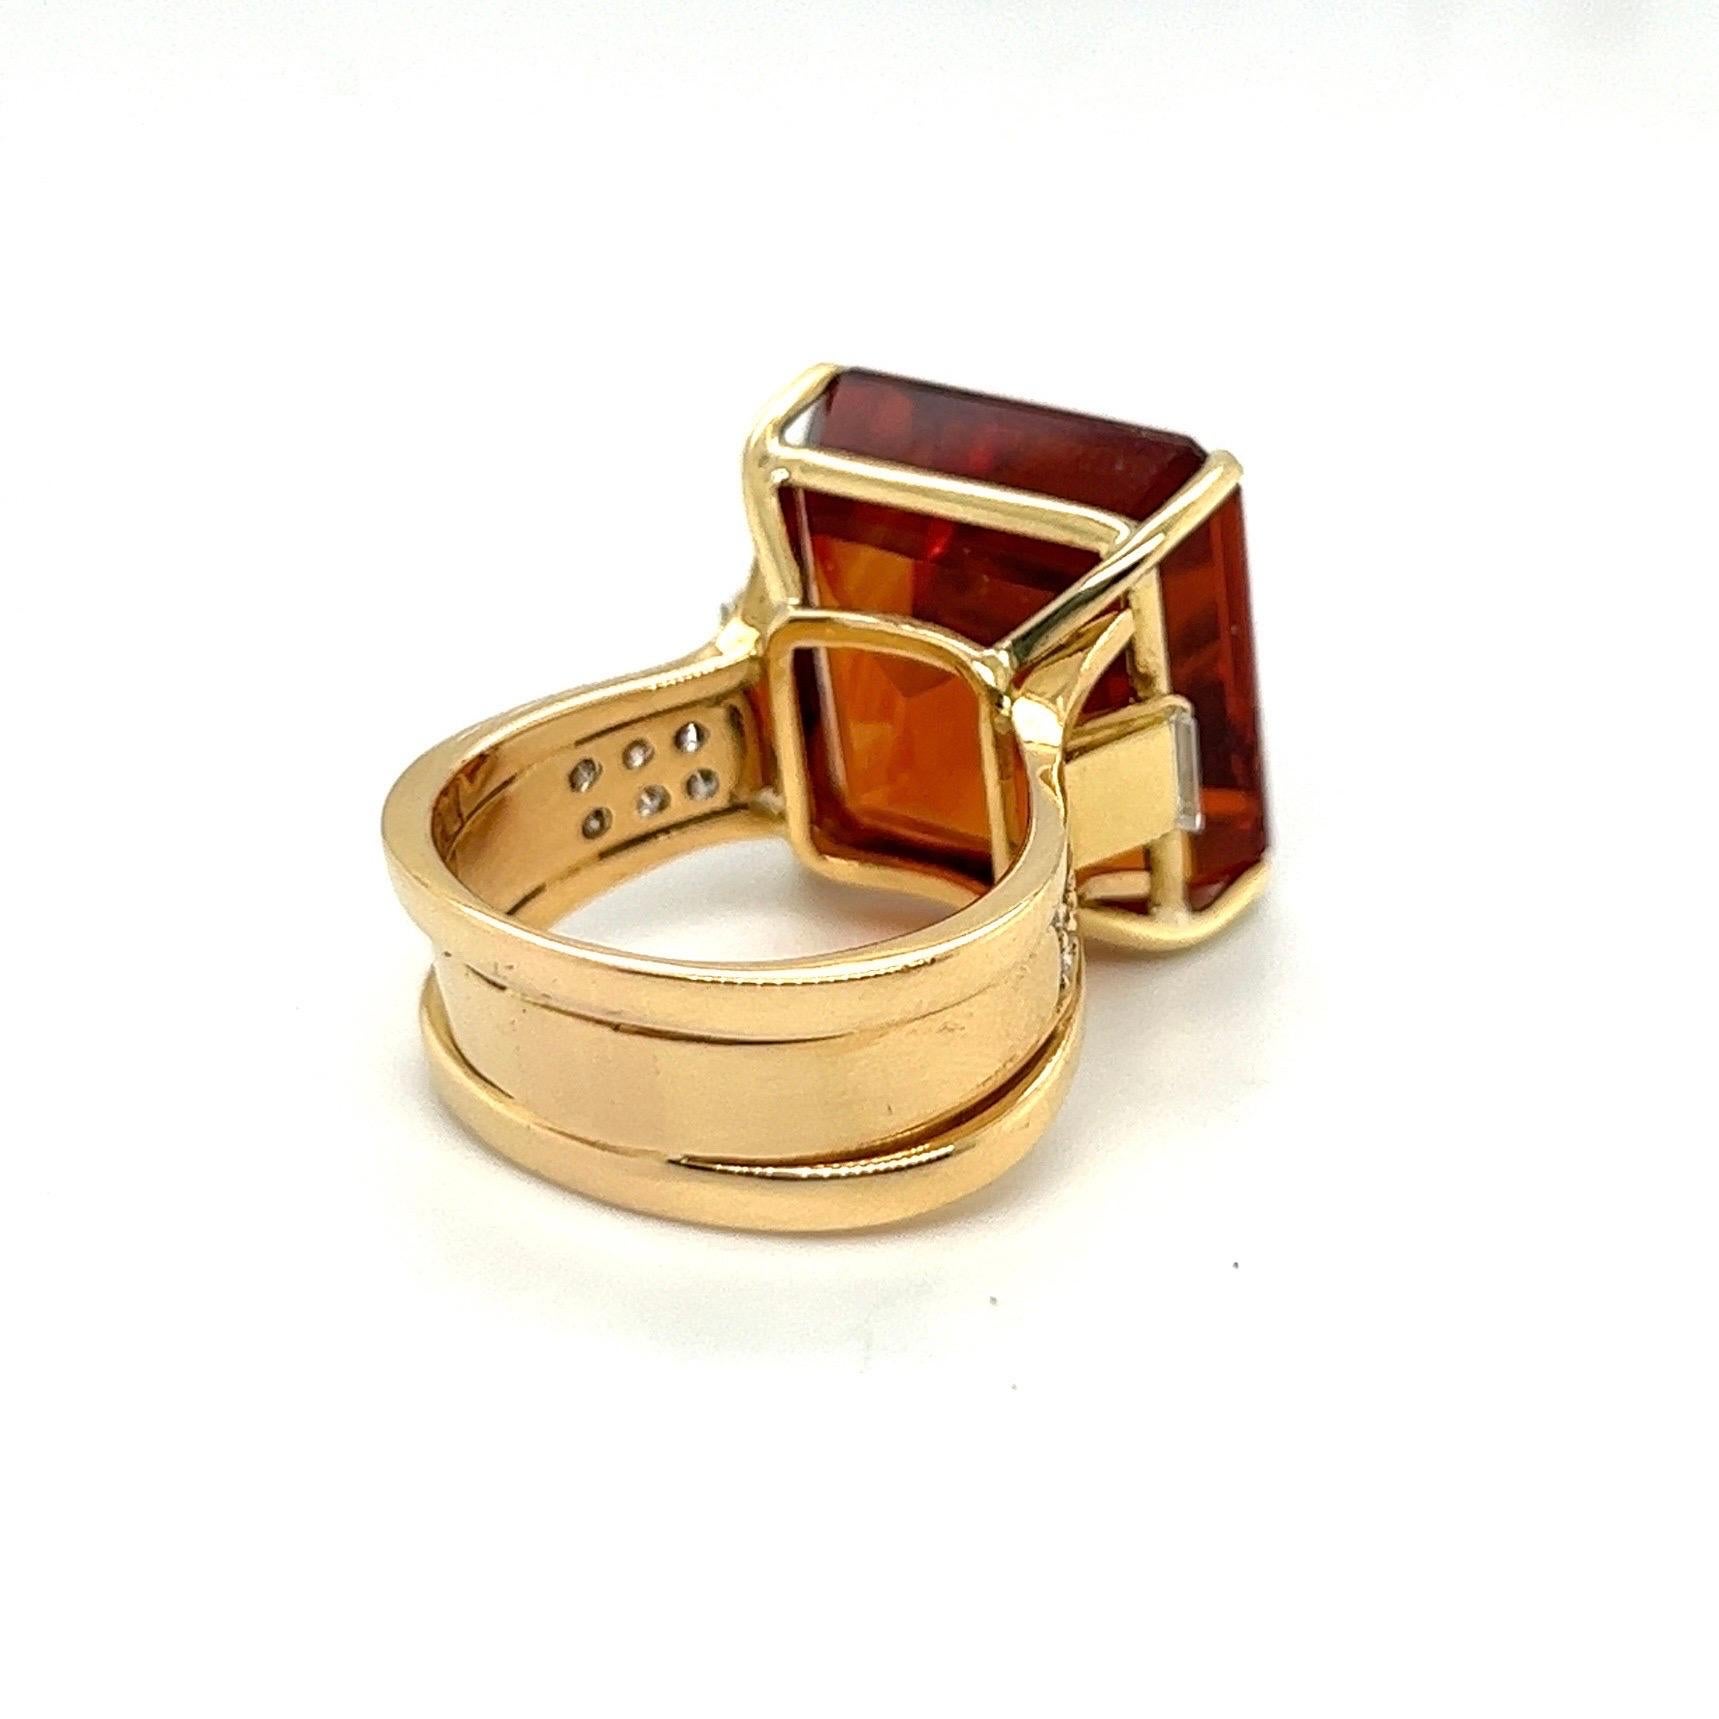 Eye-catching 18 Karat Yellow Gold Citrine and Diamod Cocktail Ring by Swiss jeweler Paul Binder, 1980s.

Of bold design, crafted in 18 karat yellow gold and set with an octagonal, step cut, honey-colored citrine of circa 22 carats flanked by two